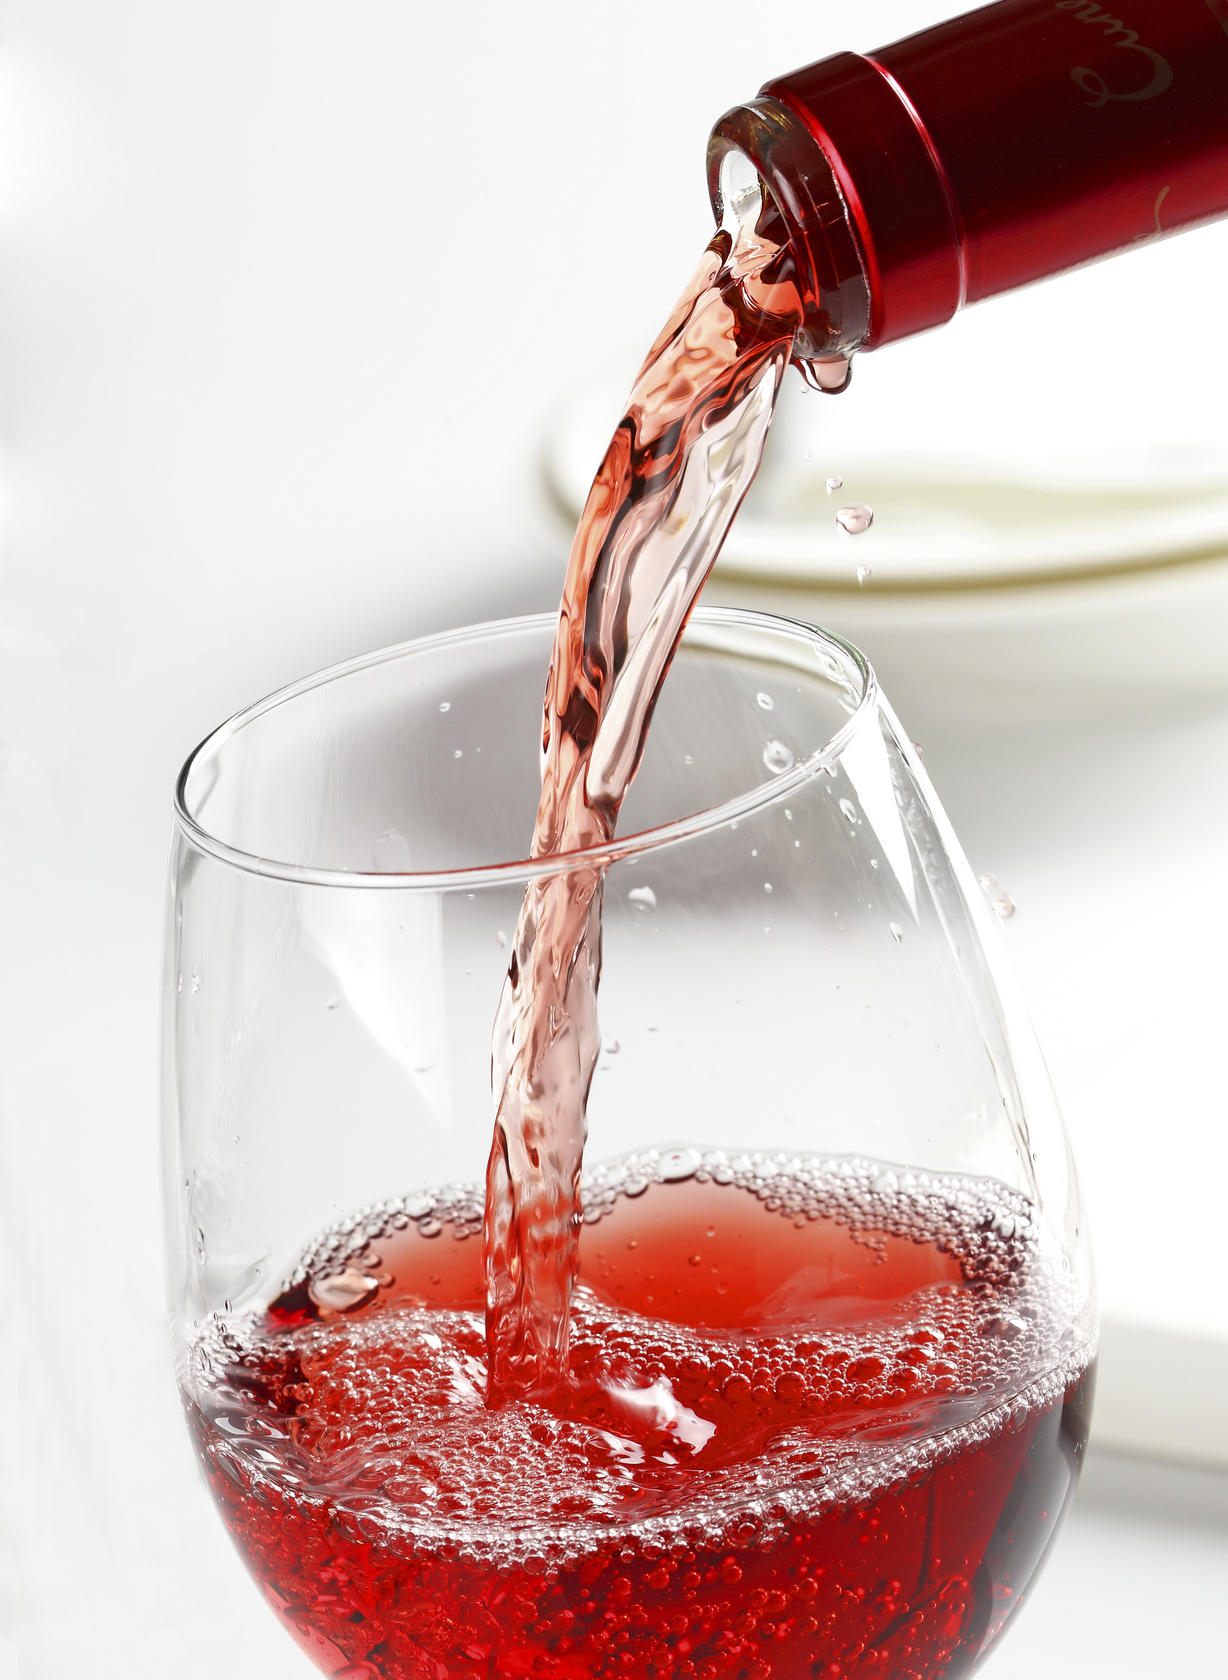 The question remains whether there are serious sparkling red wines.